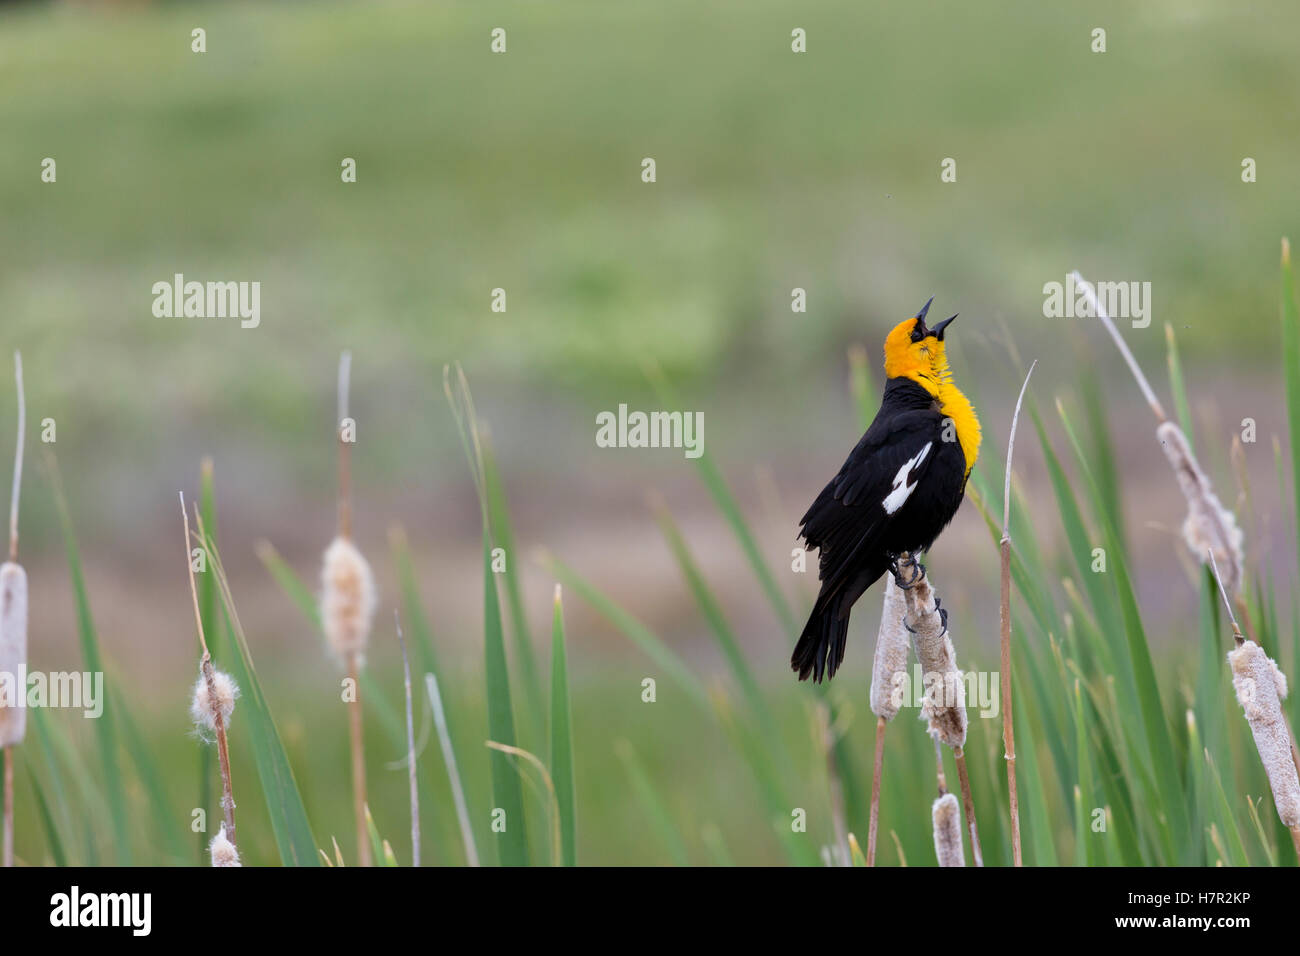 Exuberant song of yellow headed blackbird perched on cat tail stem at Farmington Bay, Utah. Horizontal image with copy space. Stock Photo